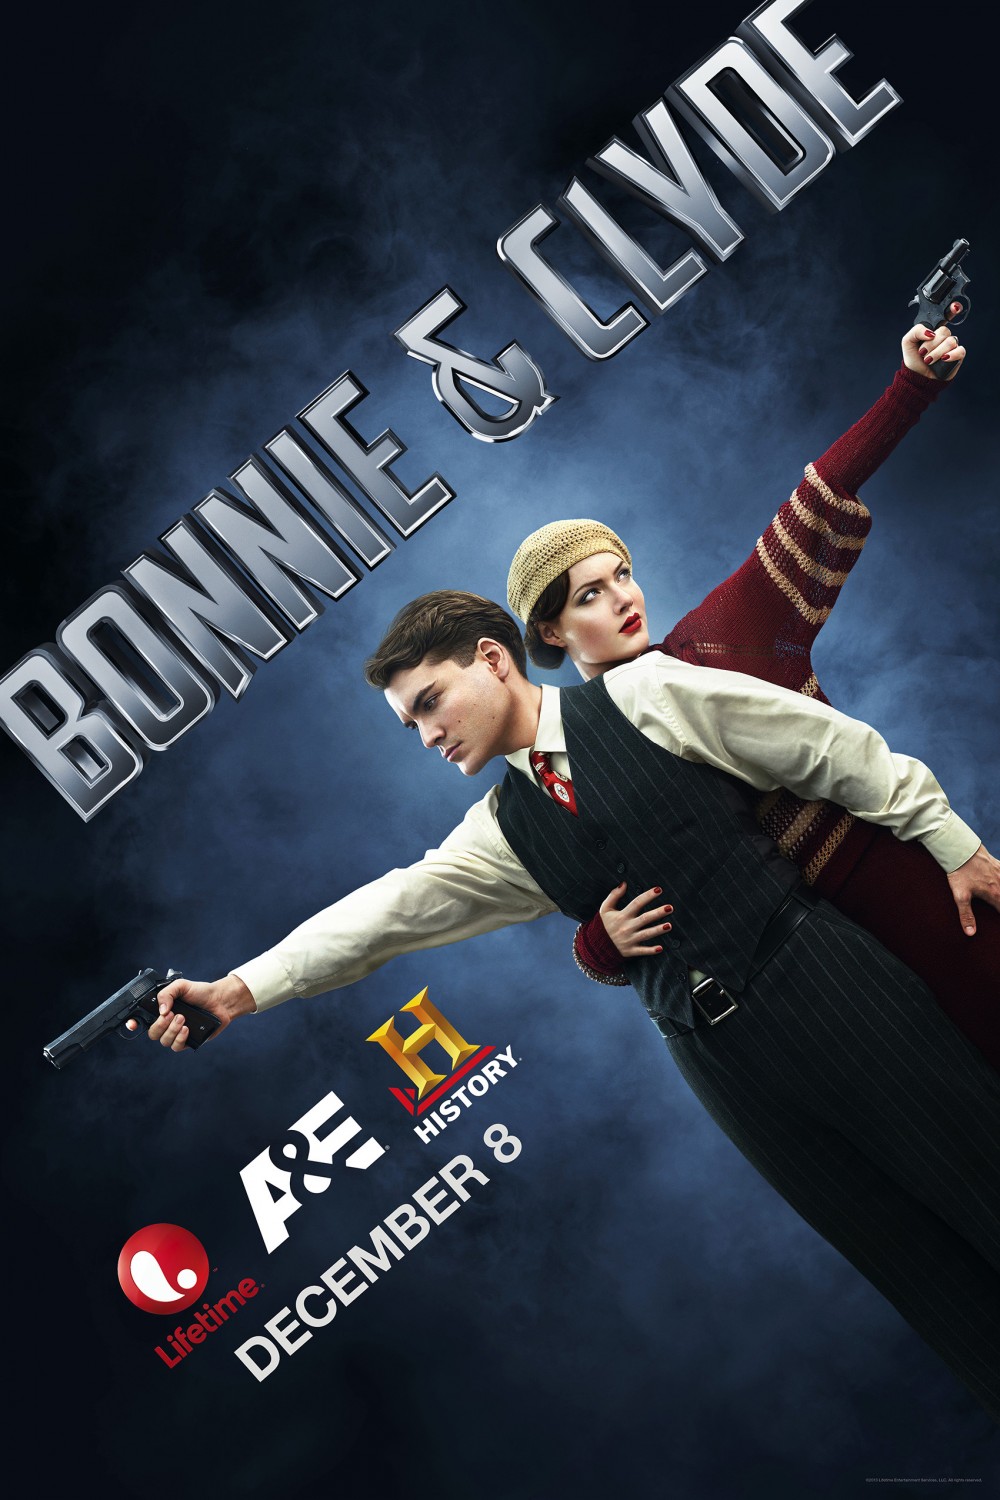 bonnie and clyde movie poster 2022